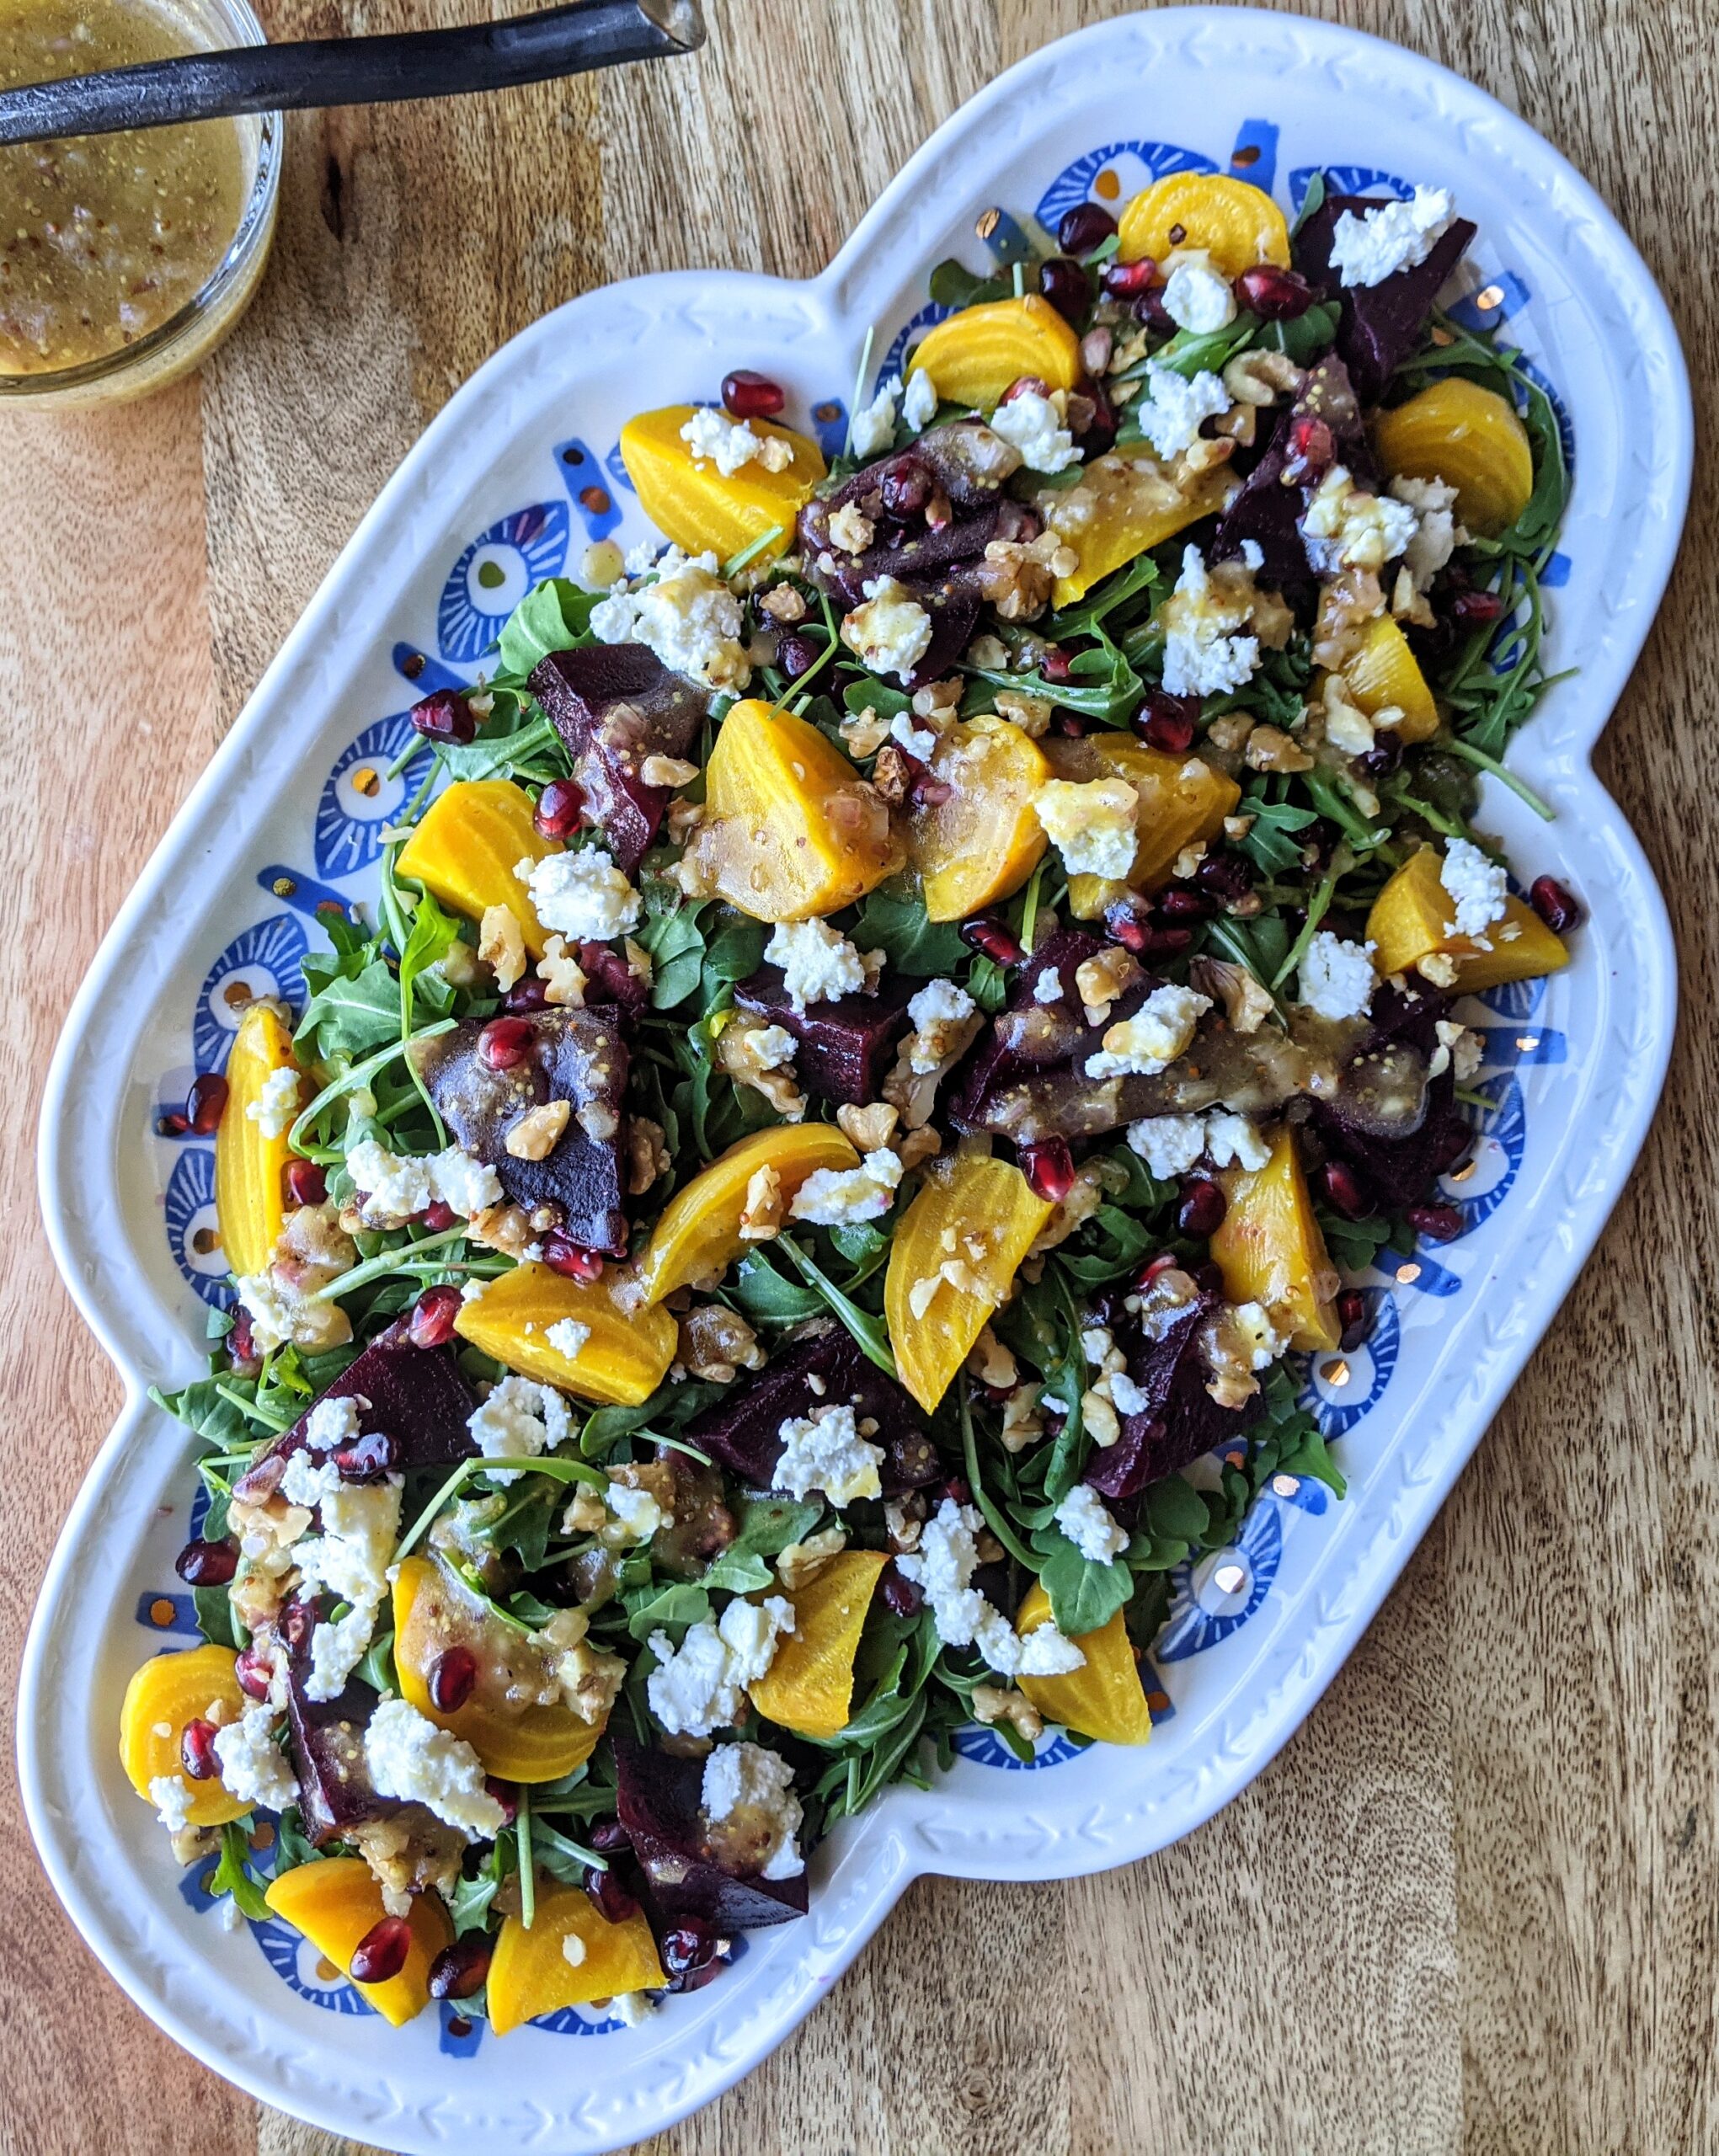 Roasted golden and purple beet salad with arugula, goat cheese, walnuts, and pomegranate arils. Served family-style on a large platter.